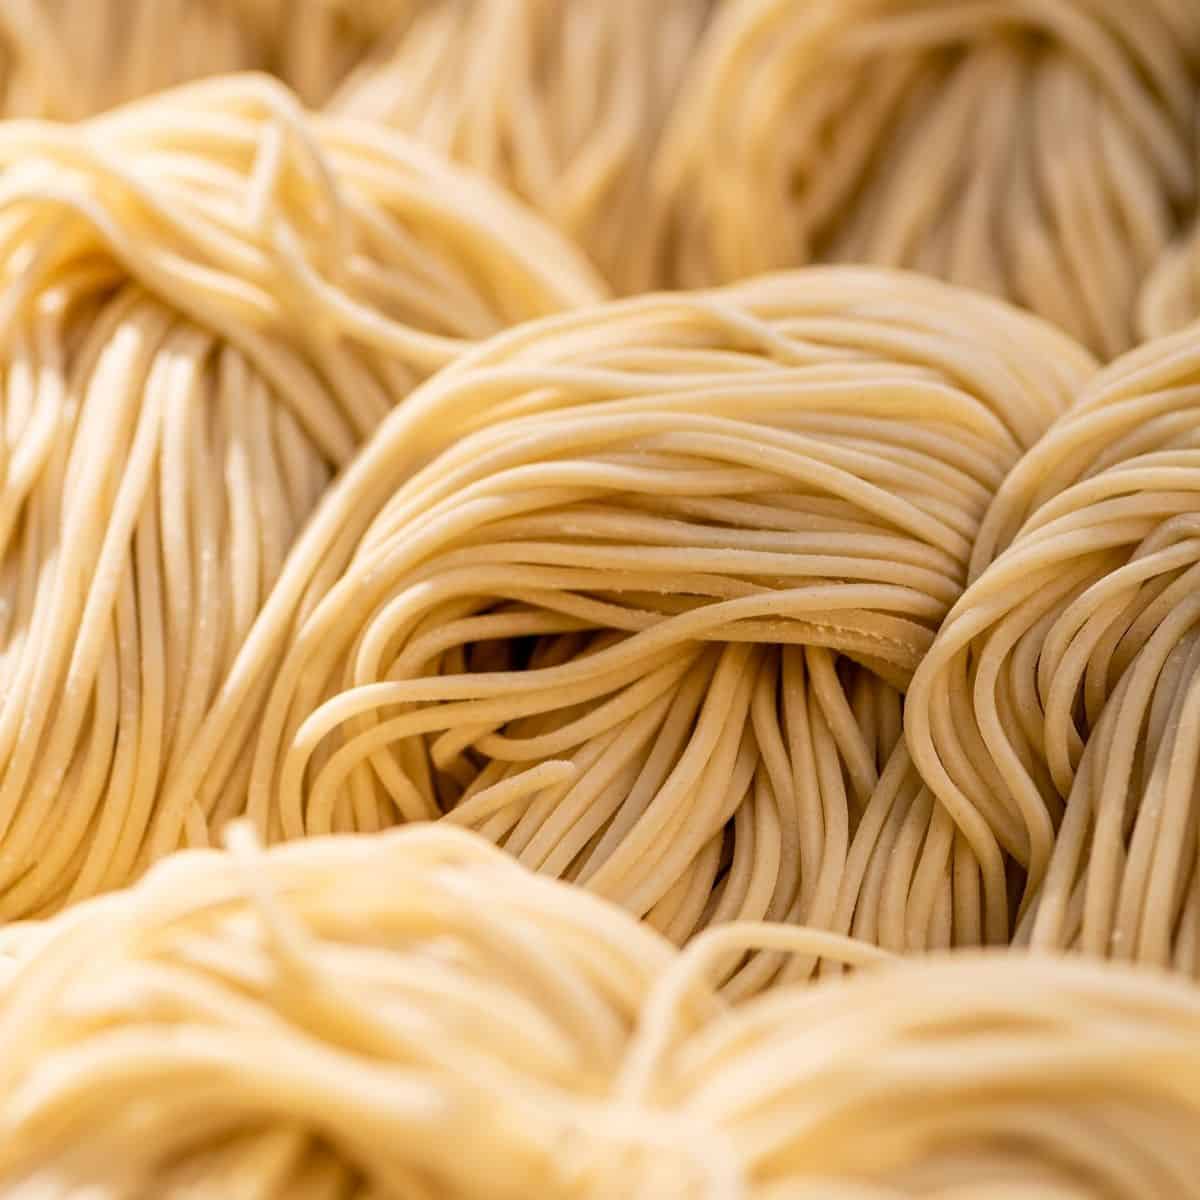 Raw and silky longevity noodles